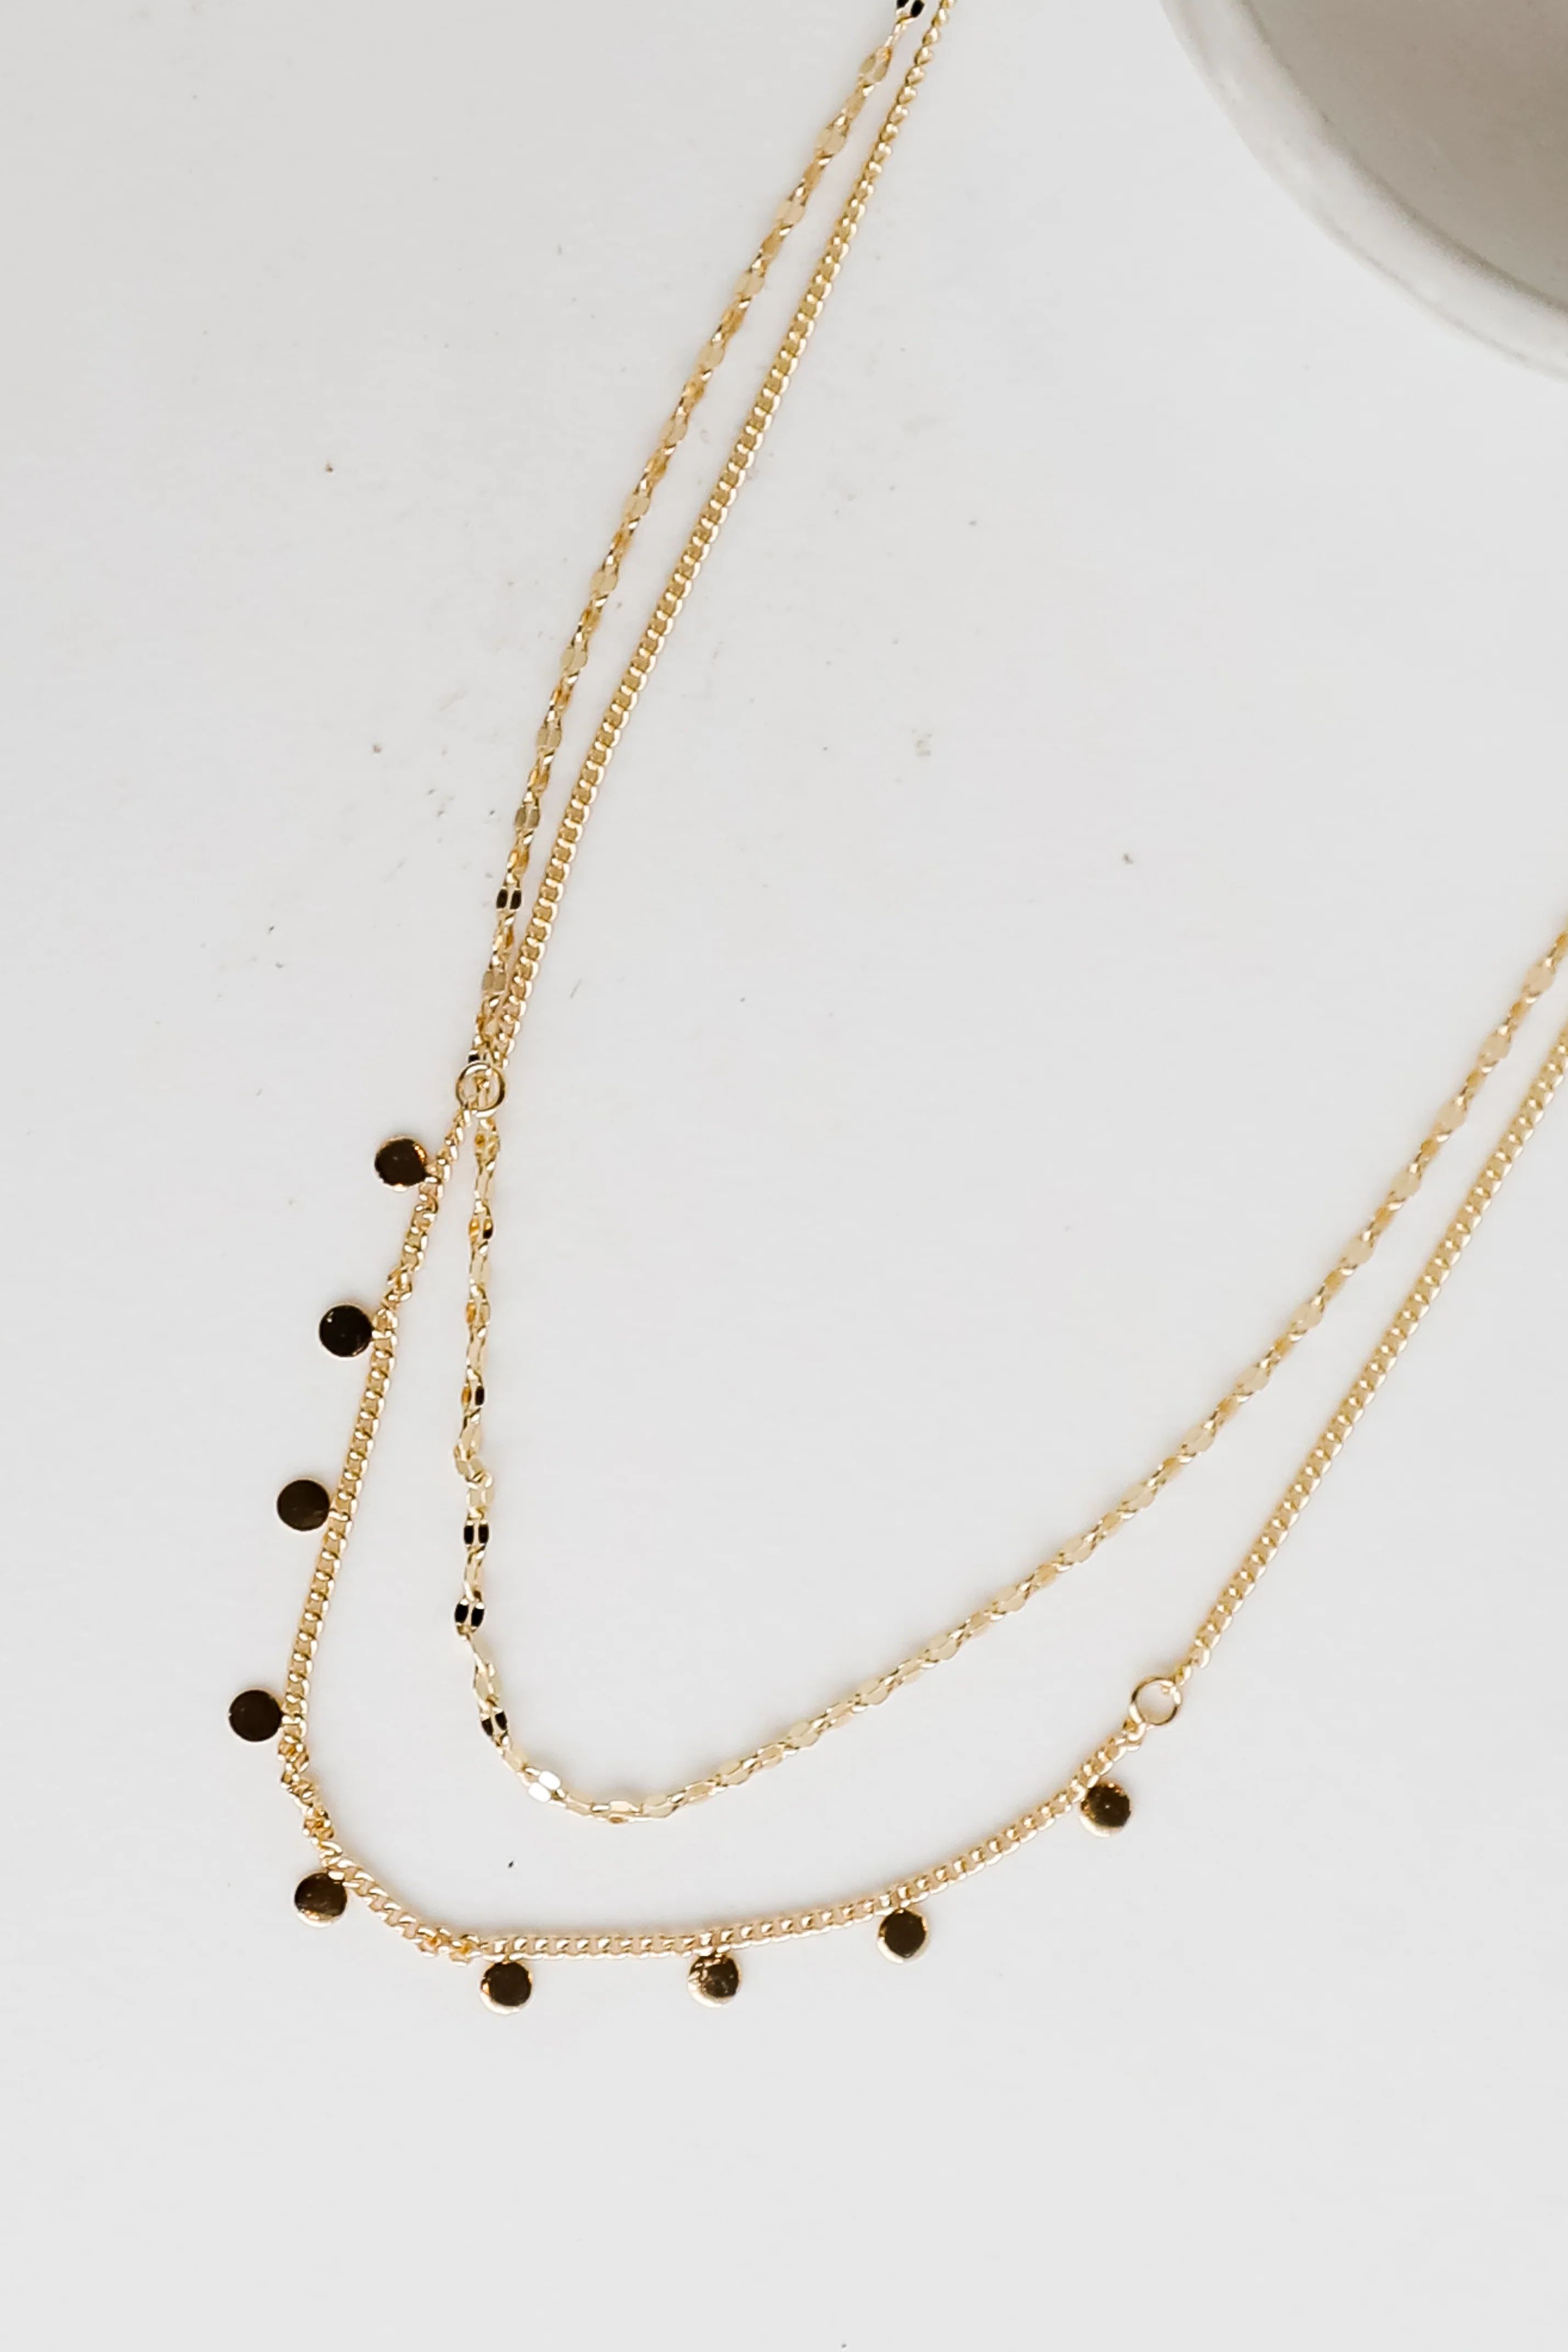 Josephine Gold Layered Chain Necklace | Dress Up